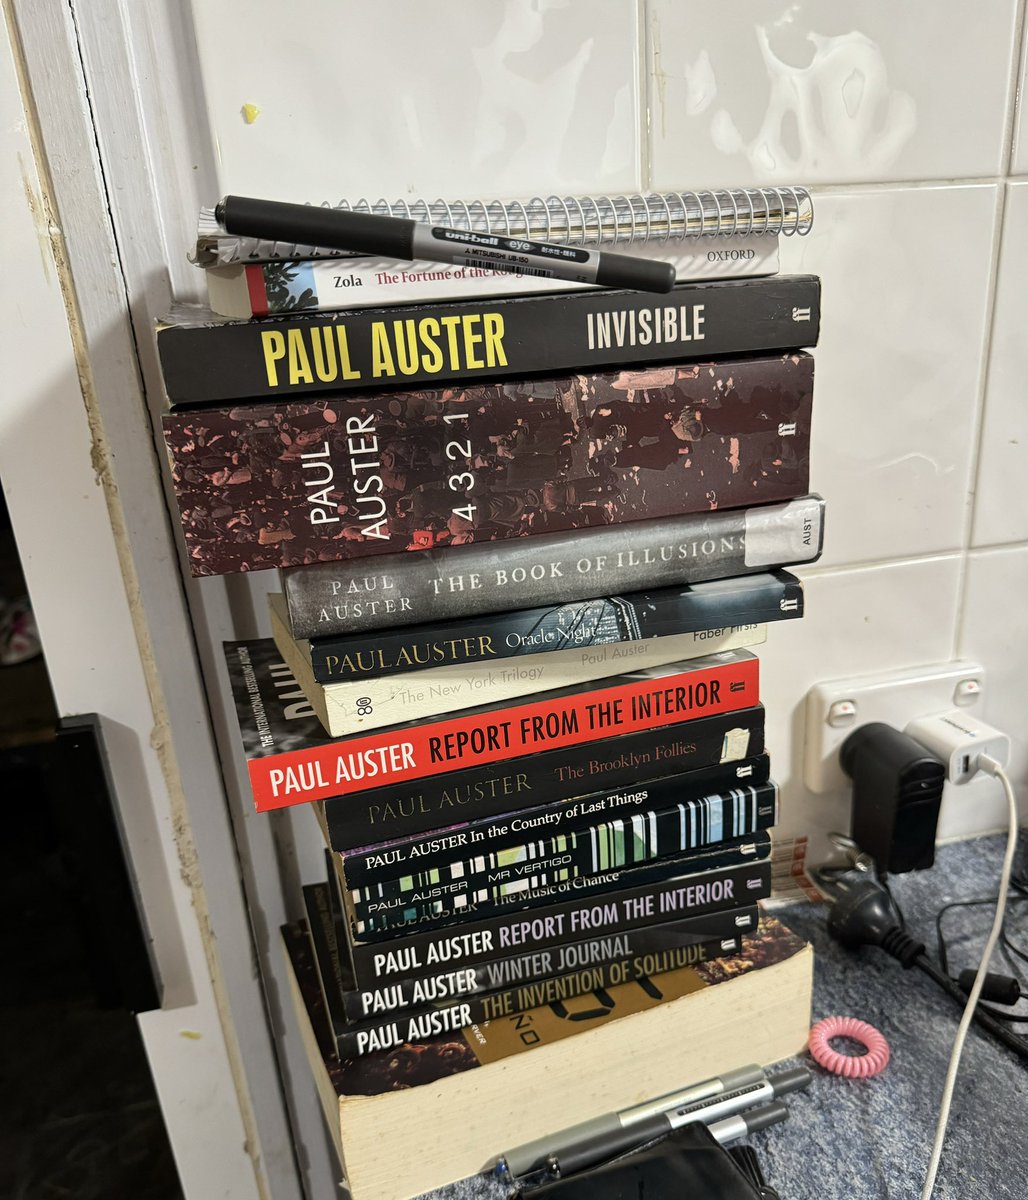 RIP to Auster Zola and Bolaño included as companions